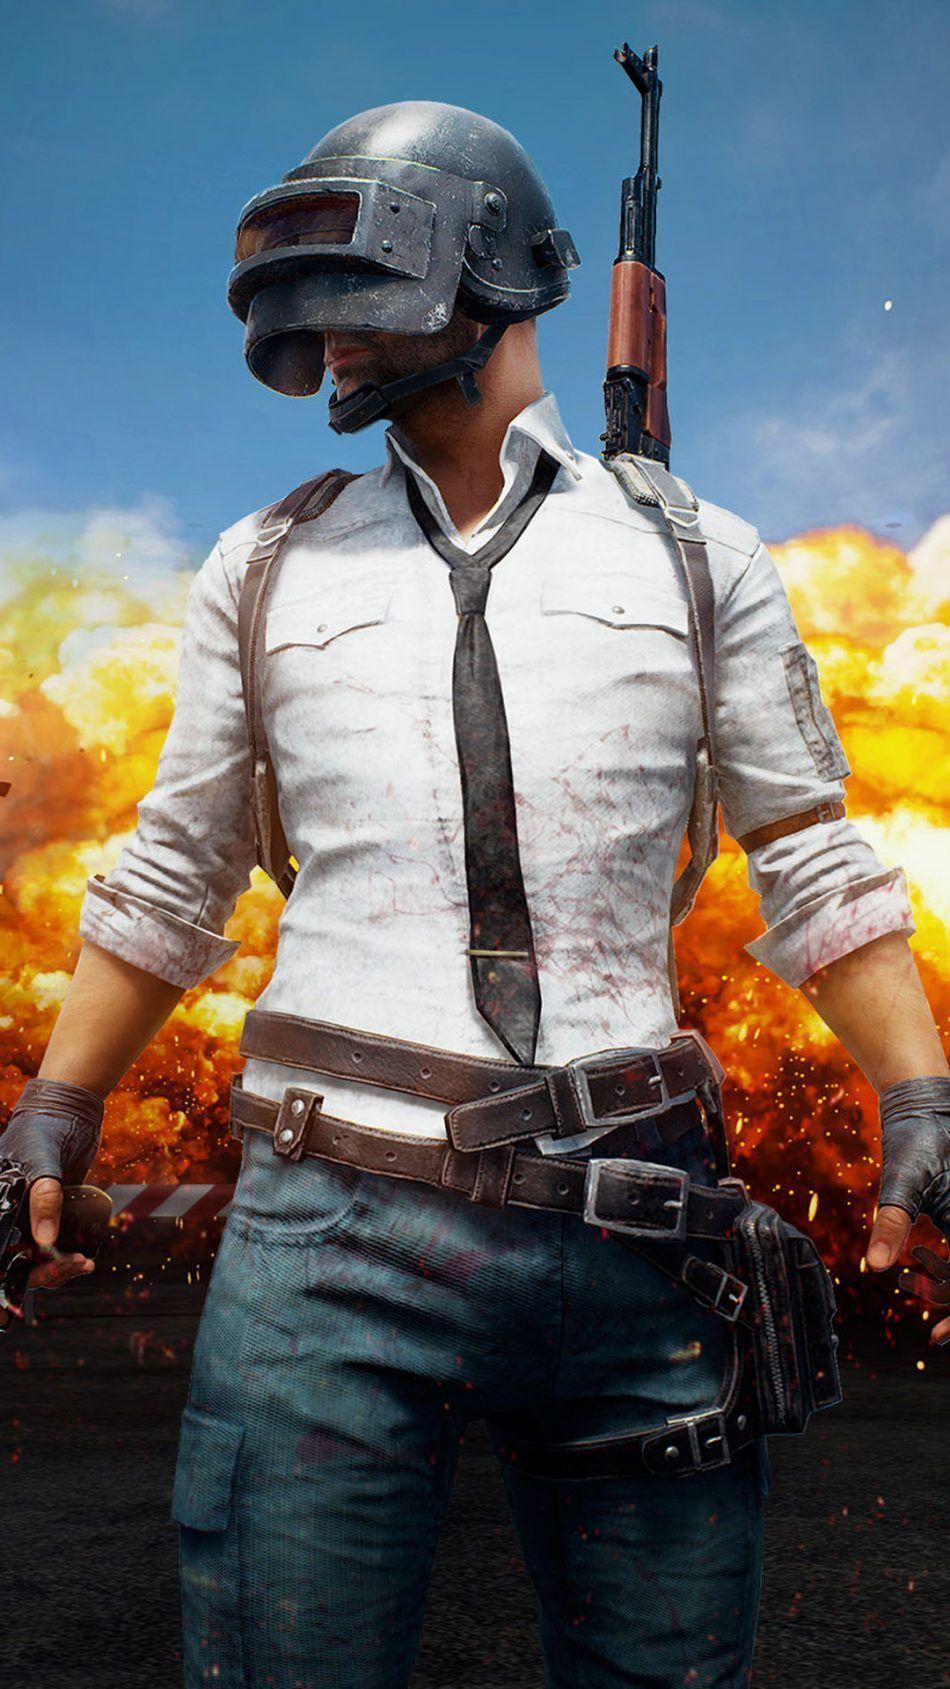 Pubg Mobile Wallpapers Top Free Pubg Mobile Backgrounds Wallpaperaccess